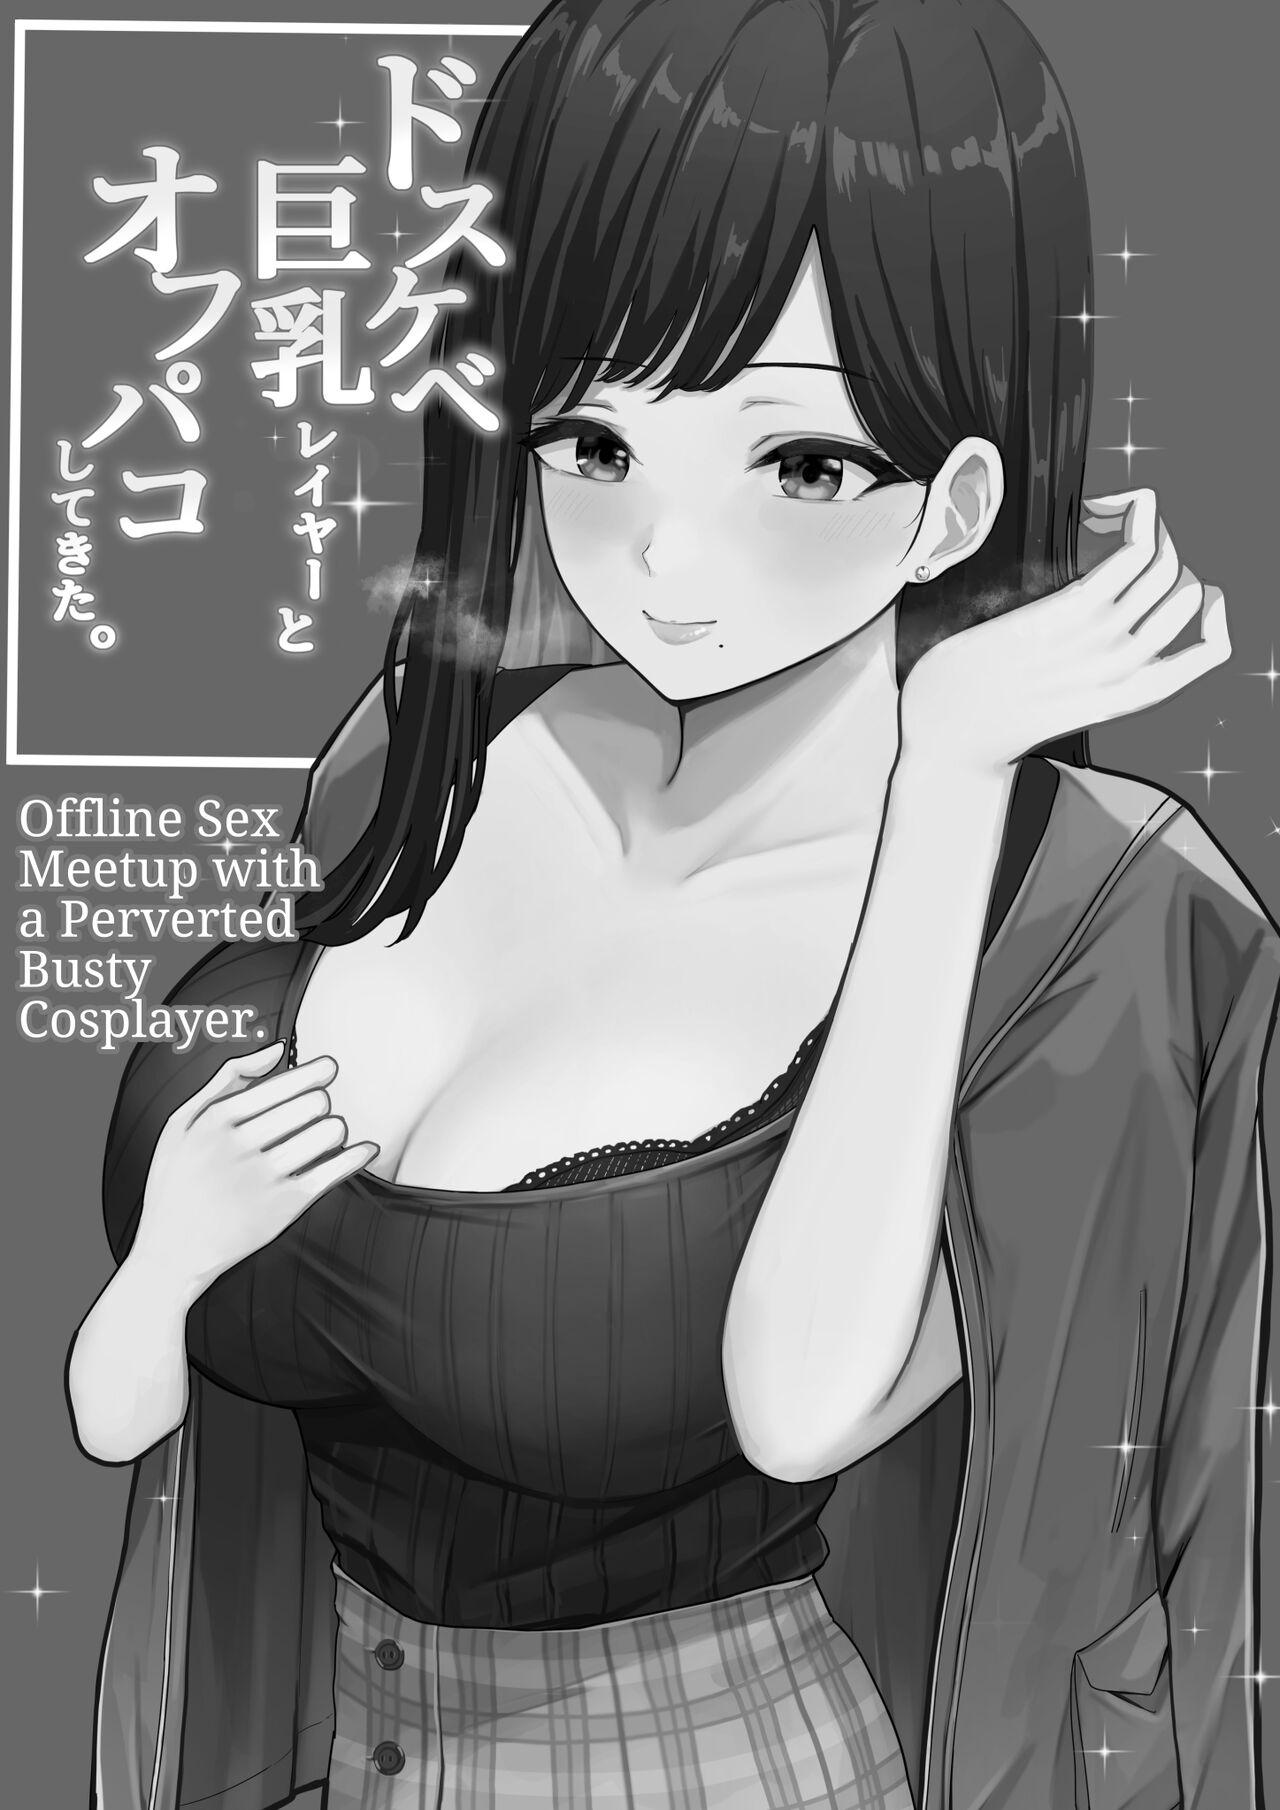 Class Room Dosukebe Kyonyuu Layer to Off-Pako shite kita. | Offline sex meetup with a perverted busty cosplayer - Original Cousin - Page 2